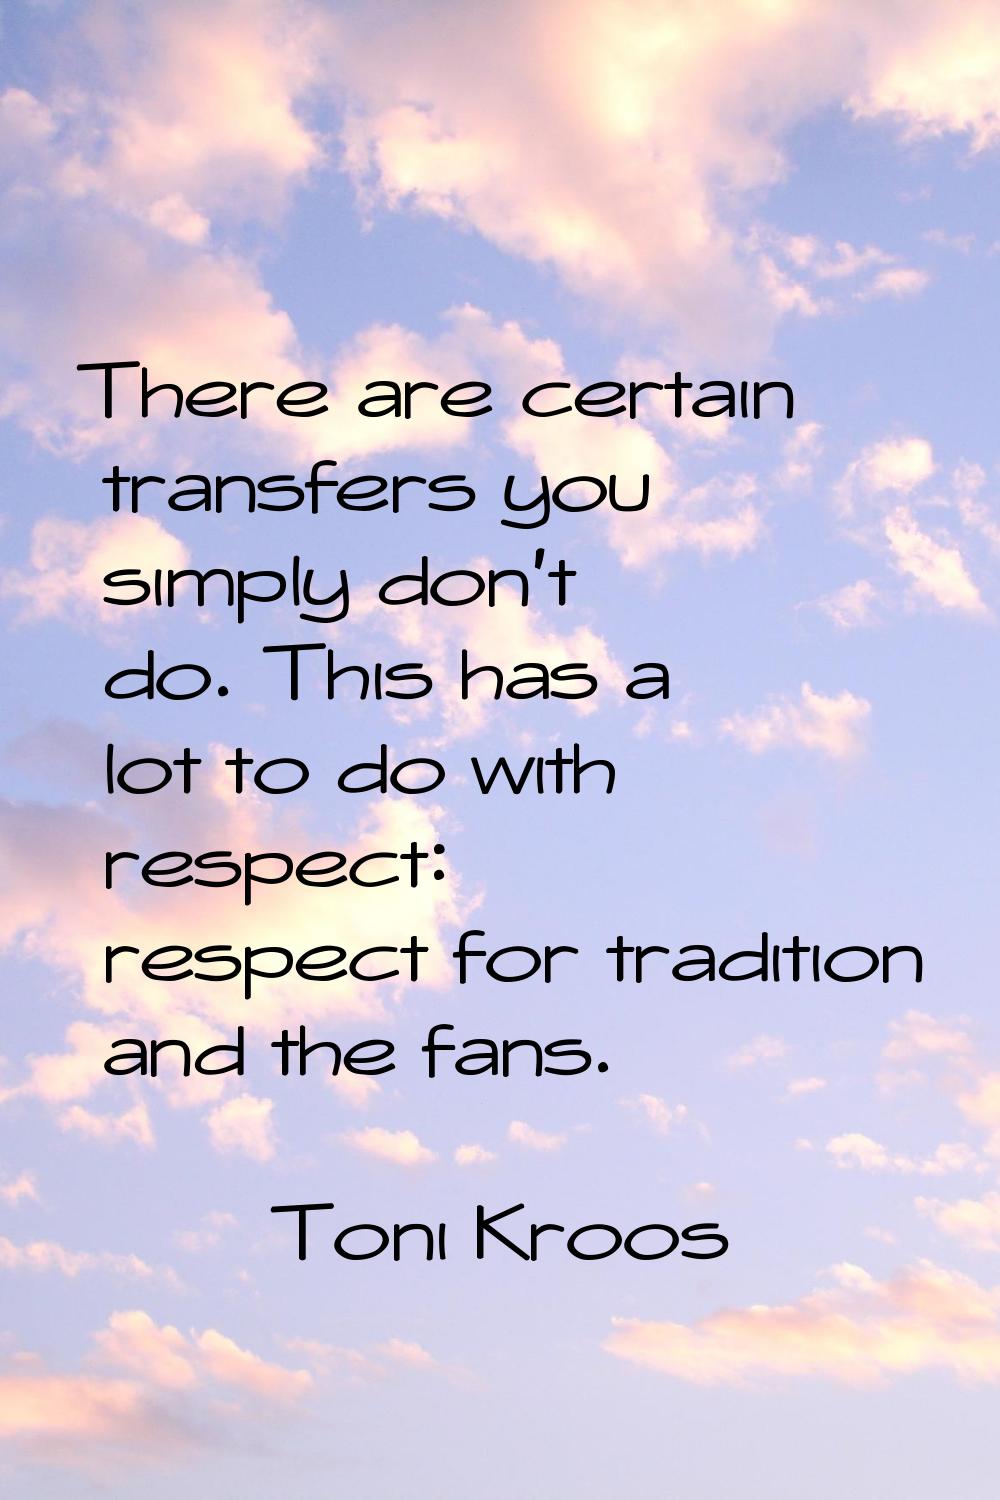 There are certain transfers you simply don't do. This has a lot to do with respect: respect for tra